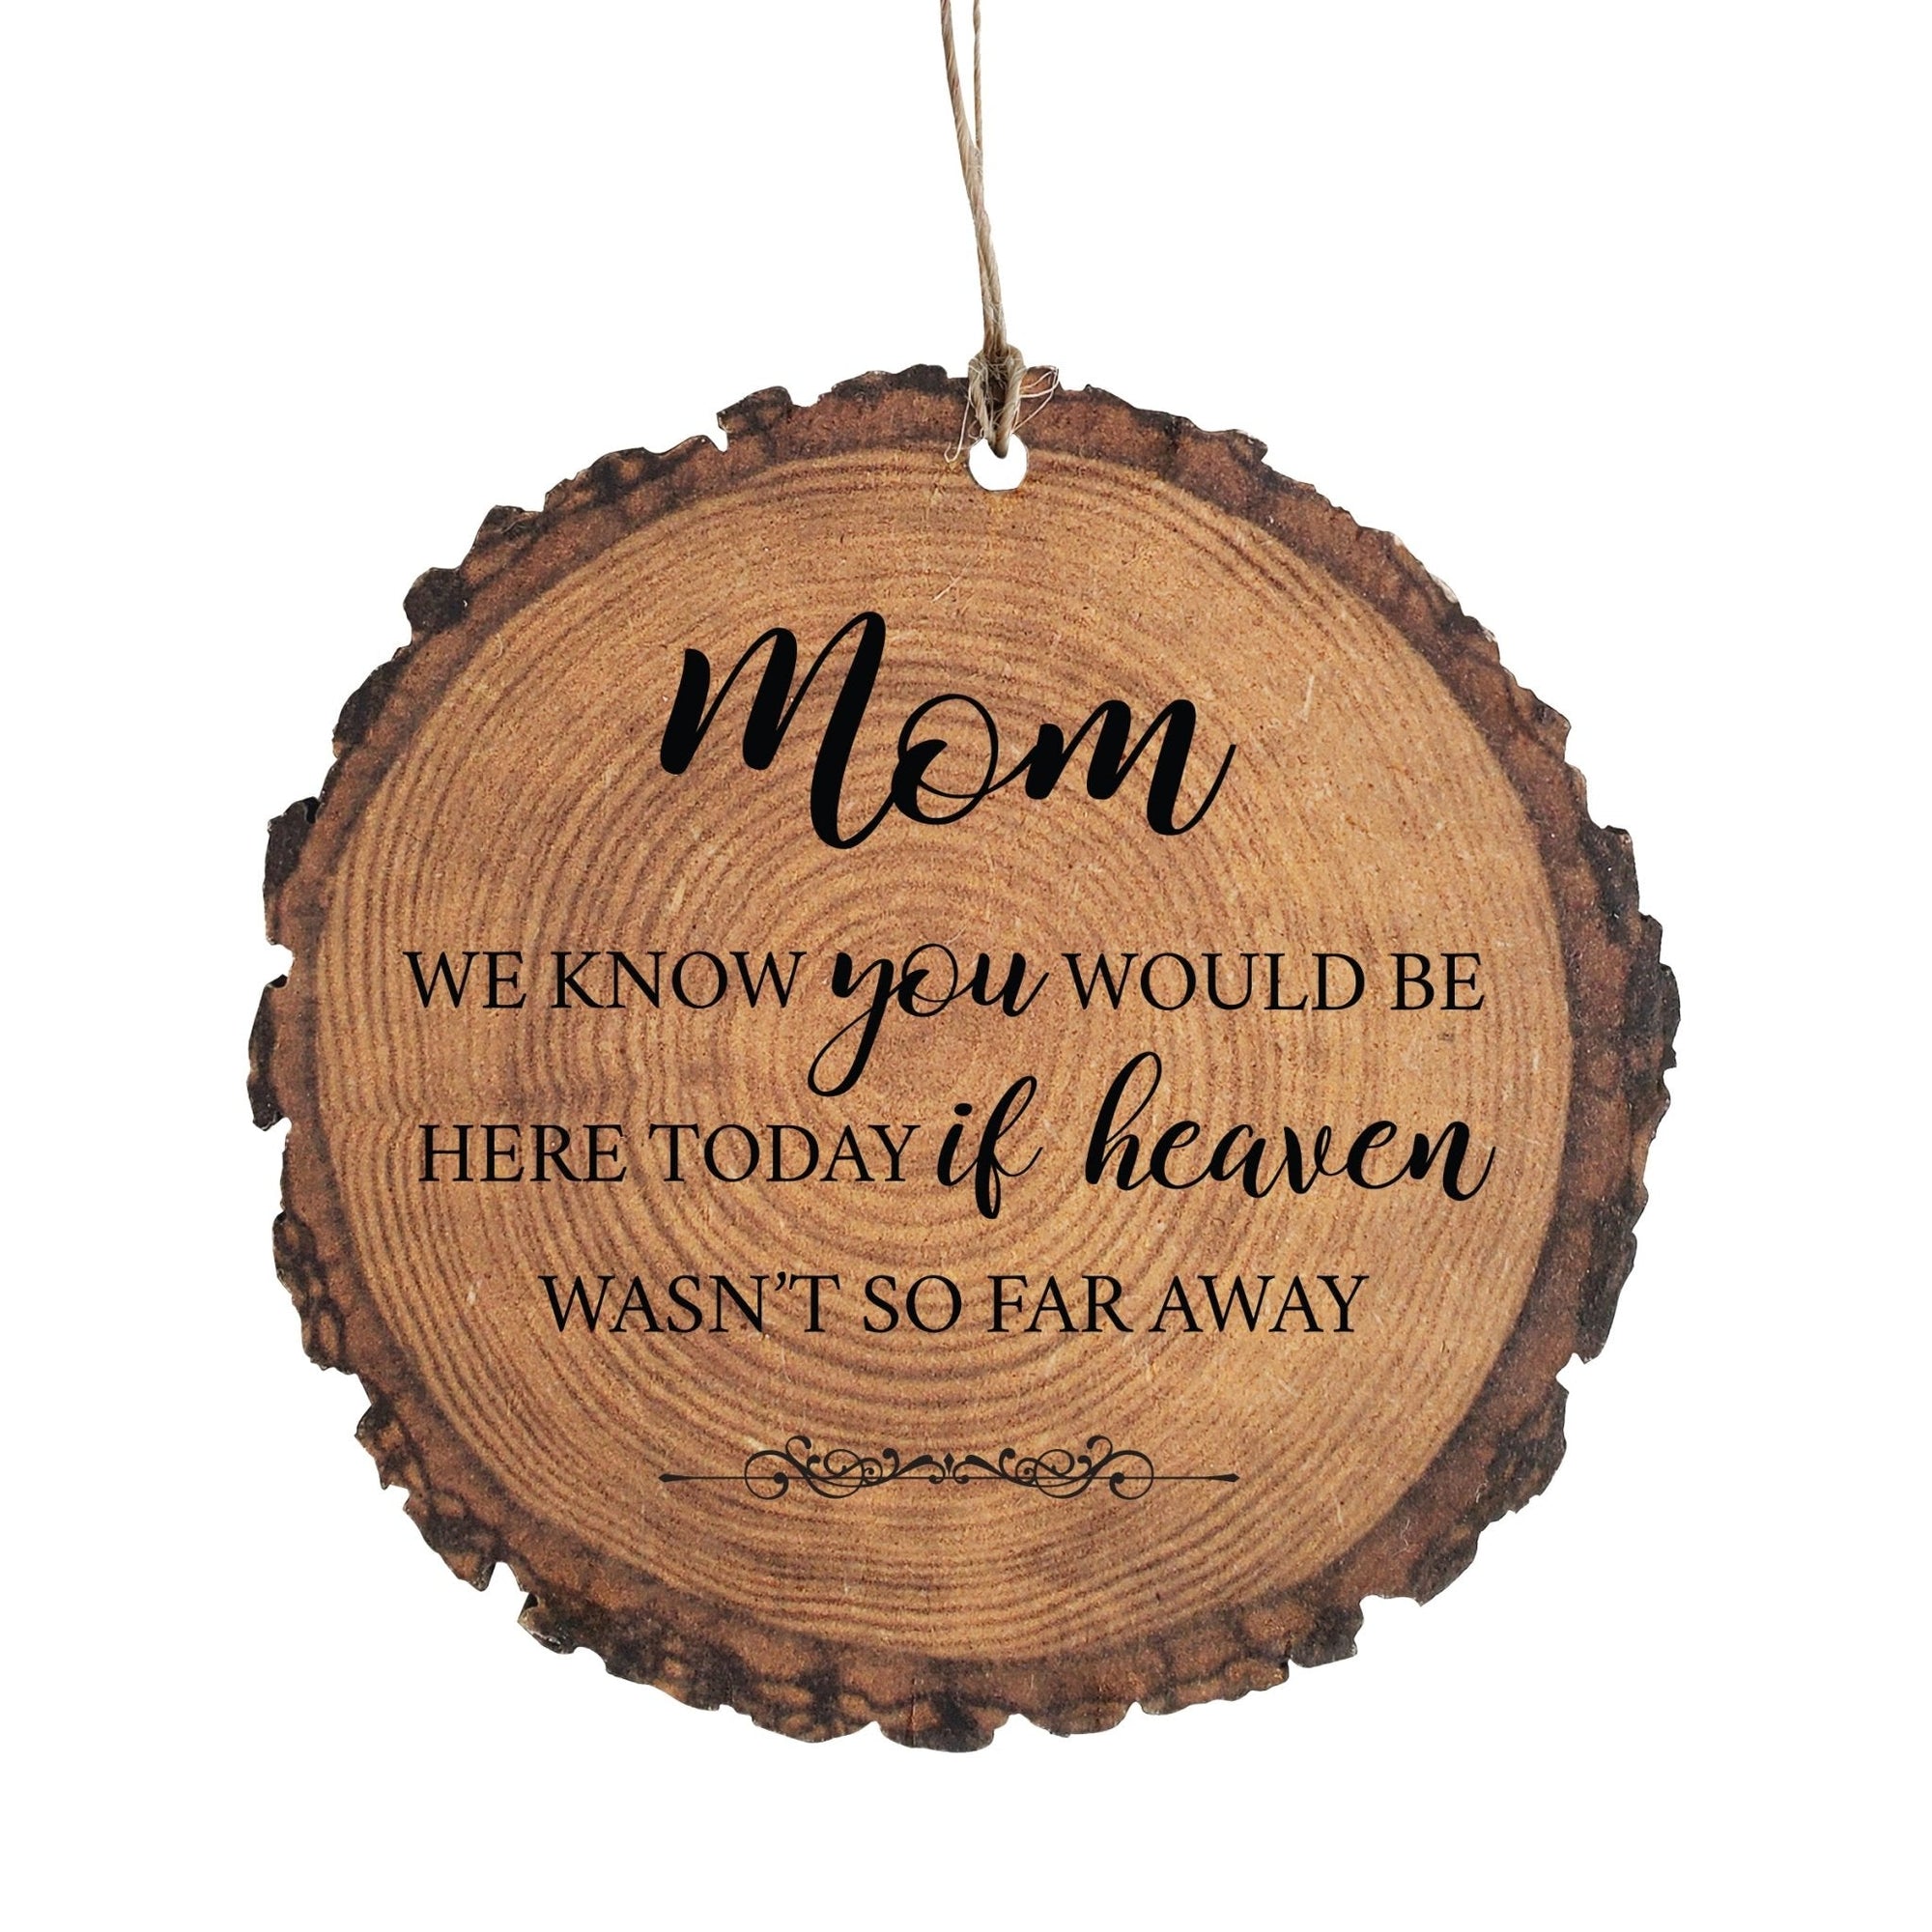 Hanging Memorial Bereavement Barky Ornament for Loss of Loved One - We Know You Would - LifeSong Milestones